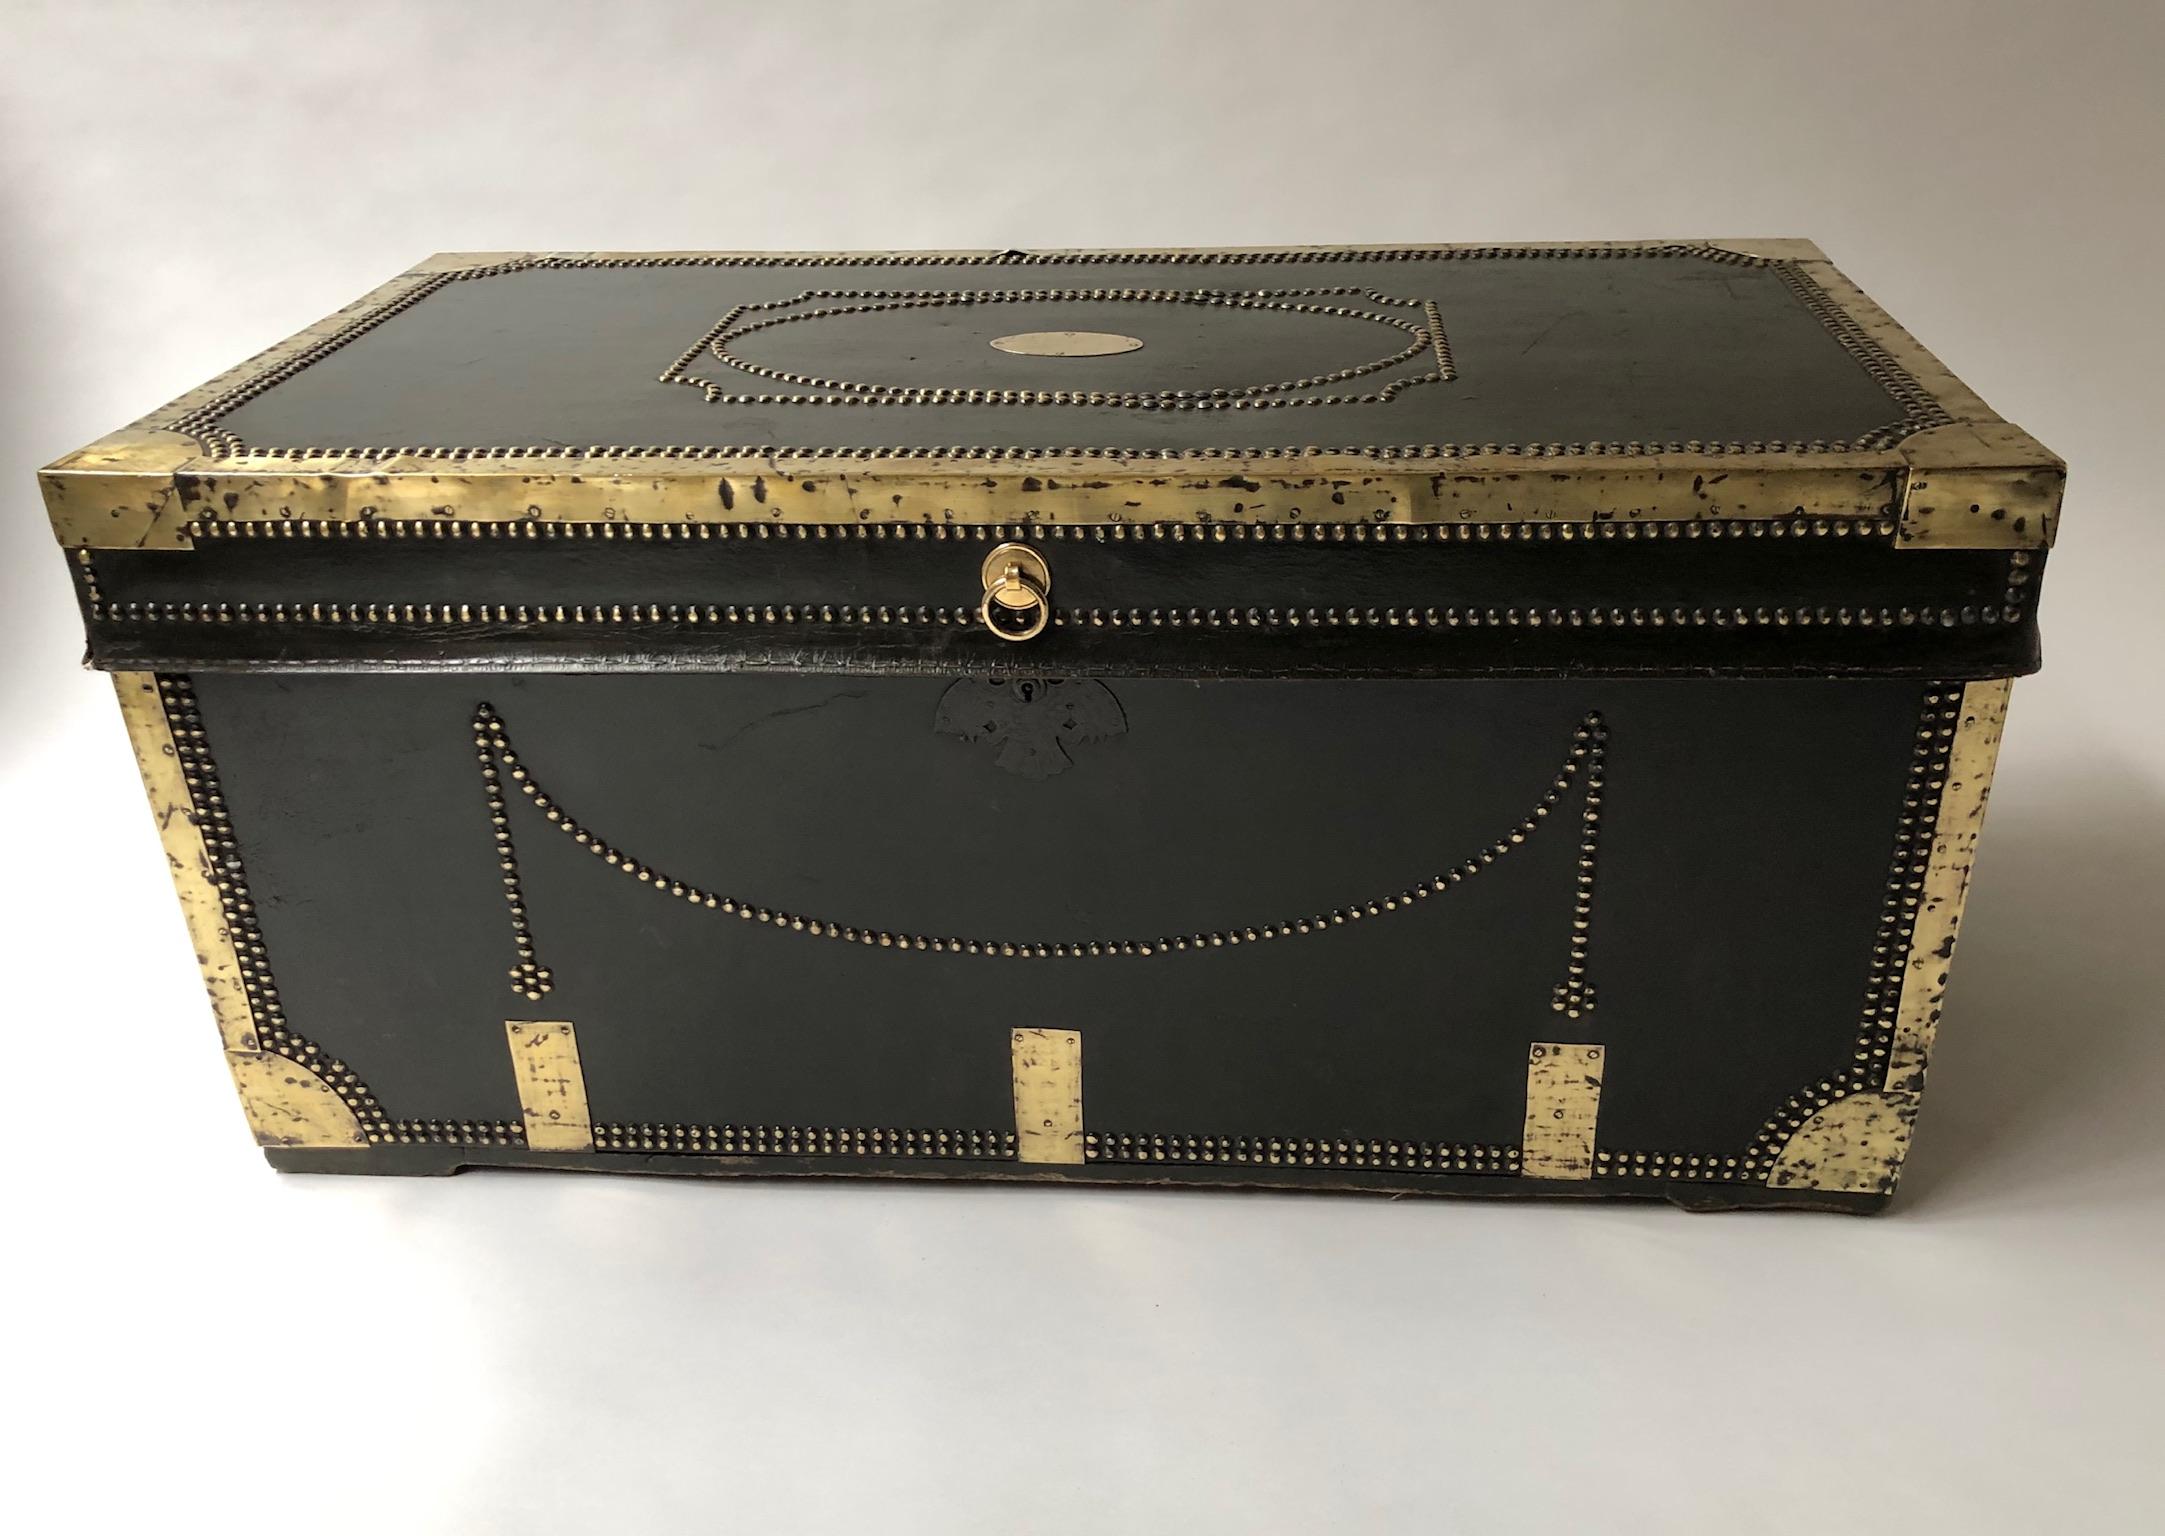 Early 19th century brass bound and studded dark green leather covered camphorwood with rising hinged
lid and side carrying handles
This is an outstanding example of a coaching travelling trunk from the period of horse-drawn stage and post coach